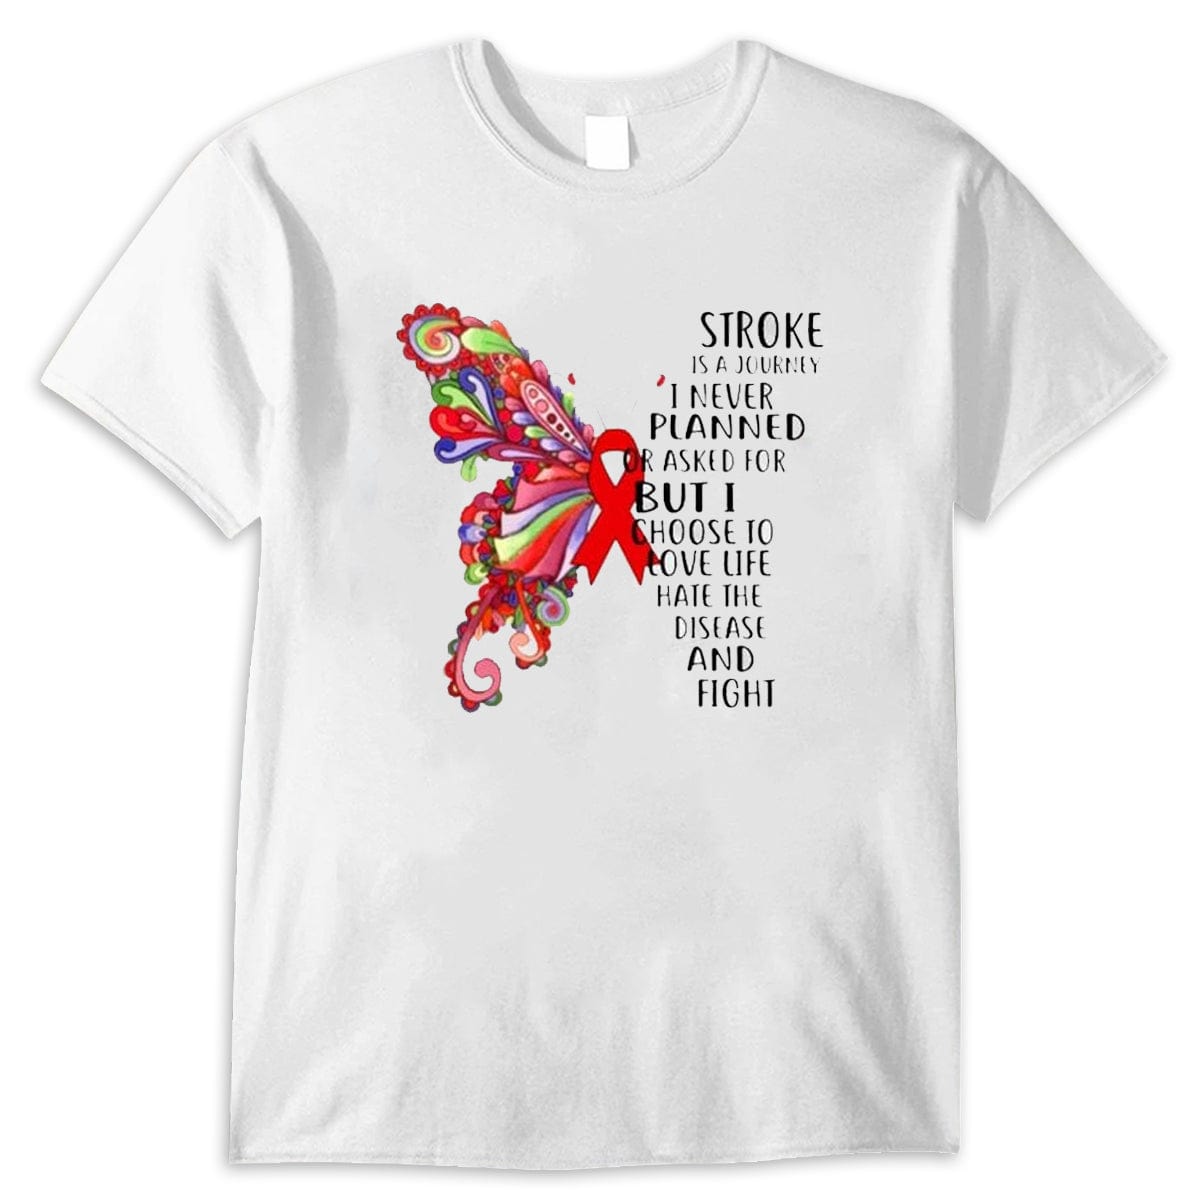 Stroke Is A Journey I Never Planned Or Asked For But I Choose To Love Life Hate The Disease And Fight Butterfly Ribbon Stroke Awareness Shirt